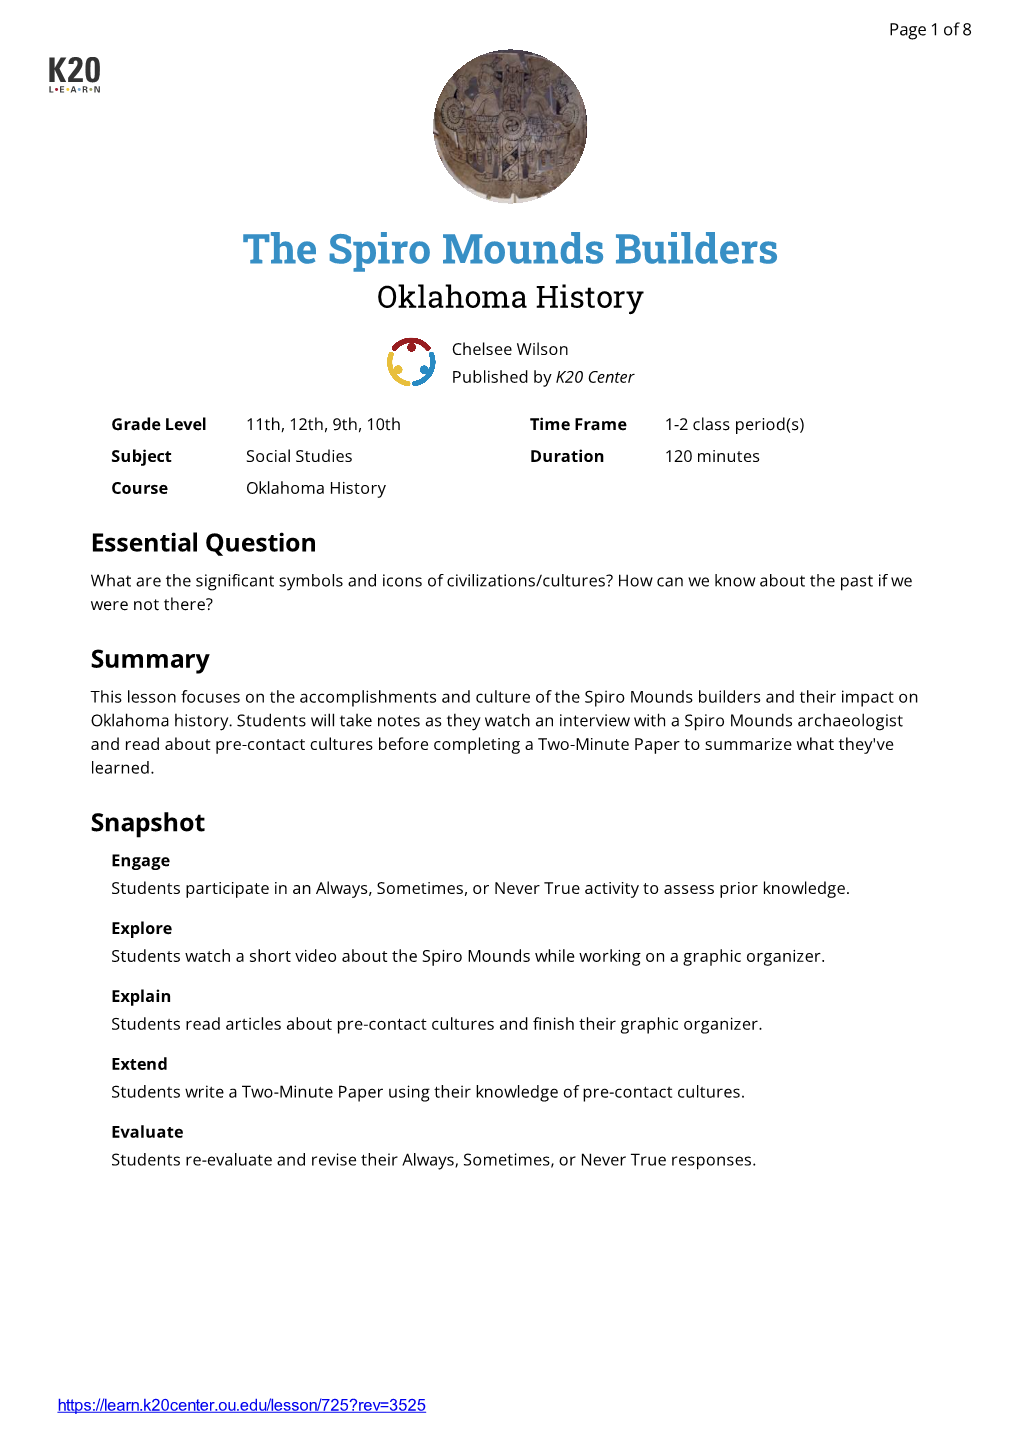 The Spiro Mounds Builders